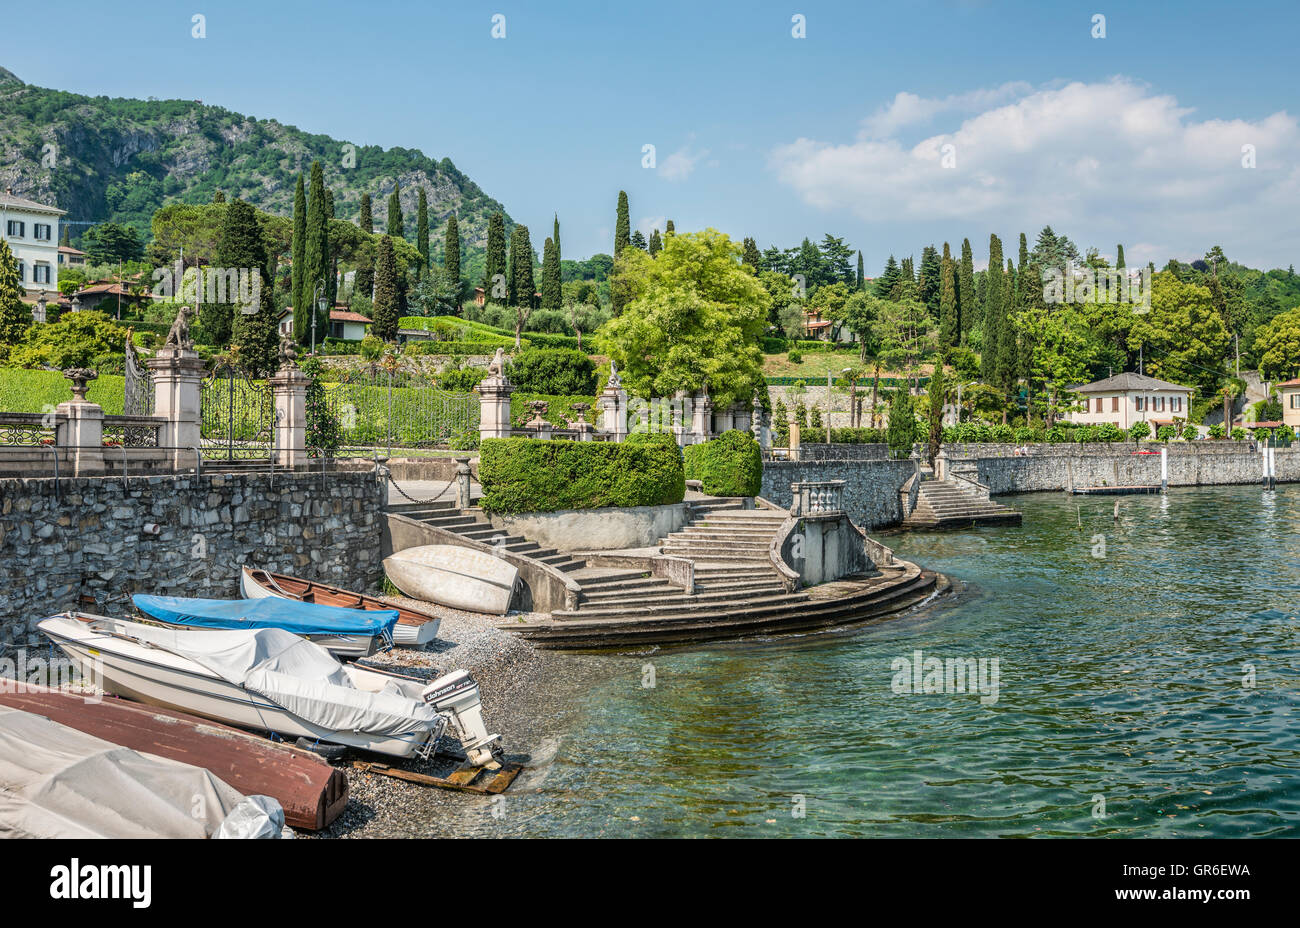 View at the waterfront of Lenno at Lake Como, Lombardy, Italy Stock Photo